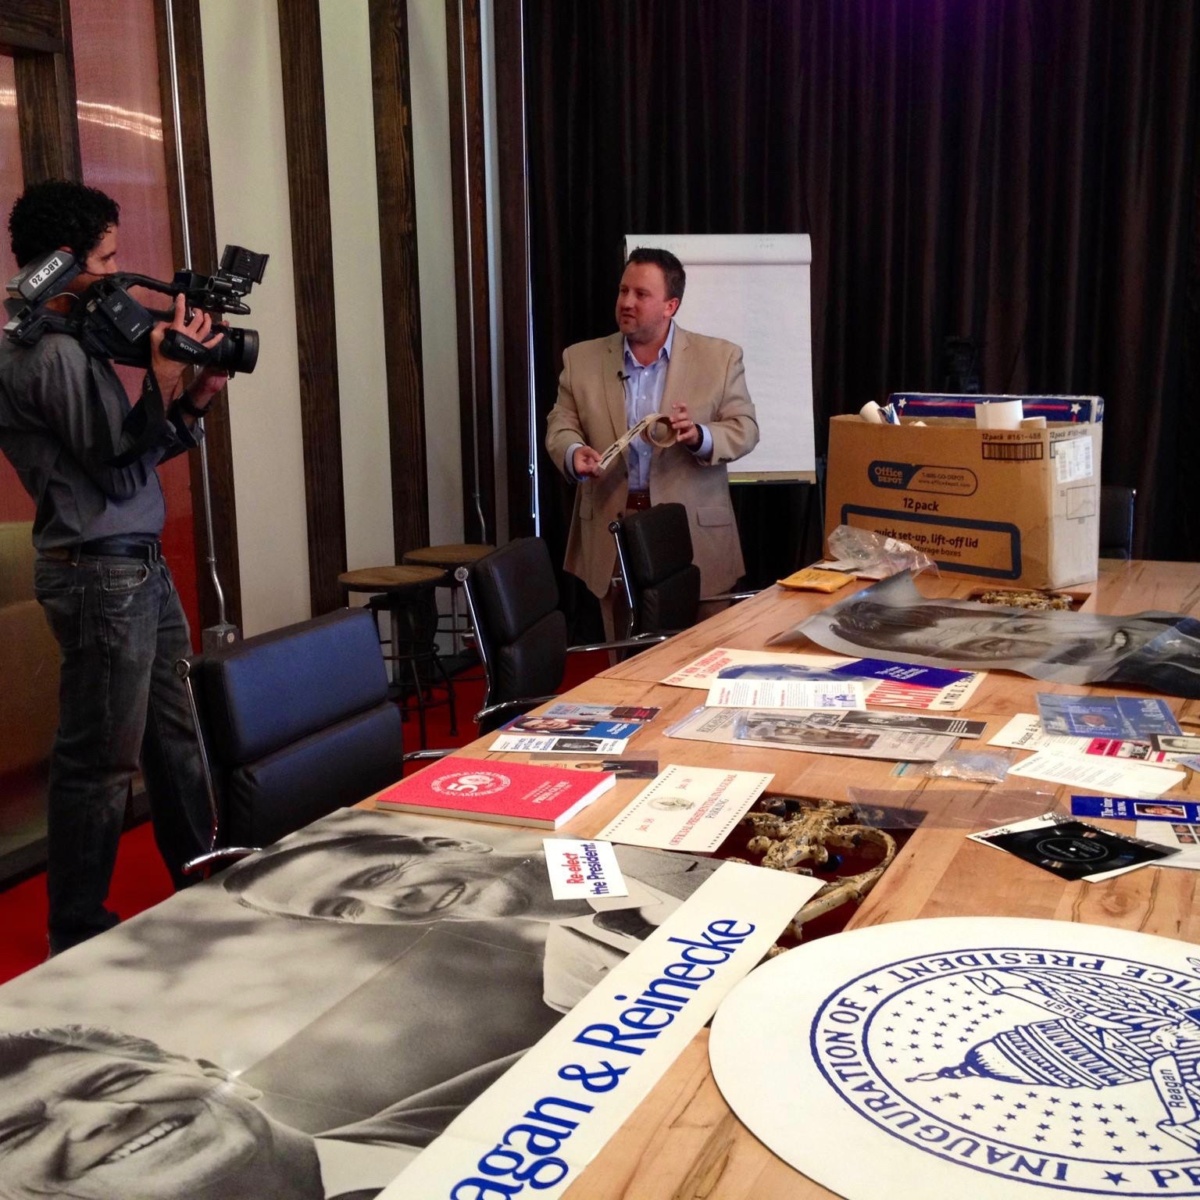 Jay getting interviewed by News with a Twist about his Ronald Reagan memorabilia collection